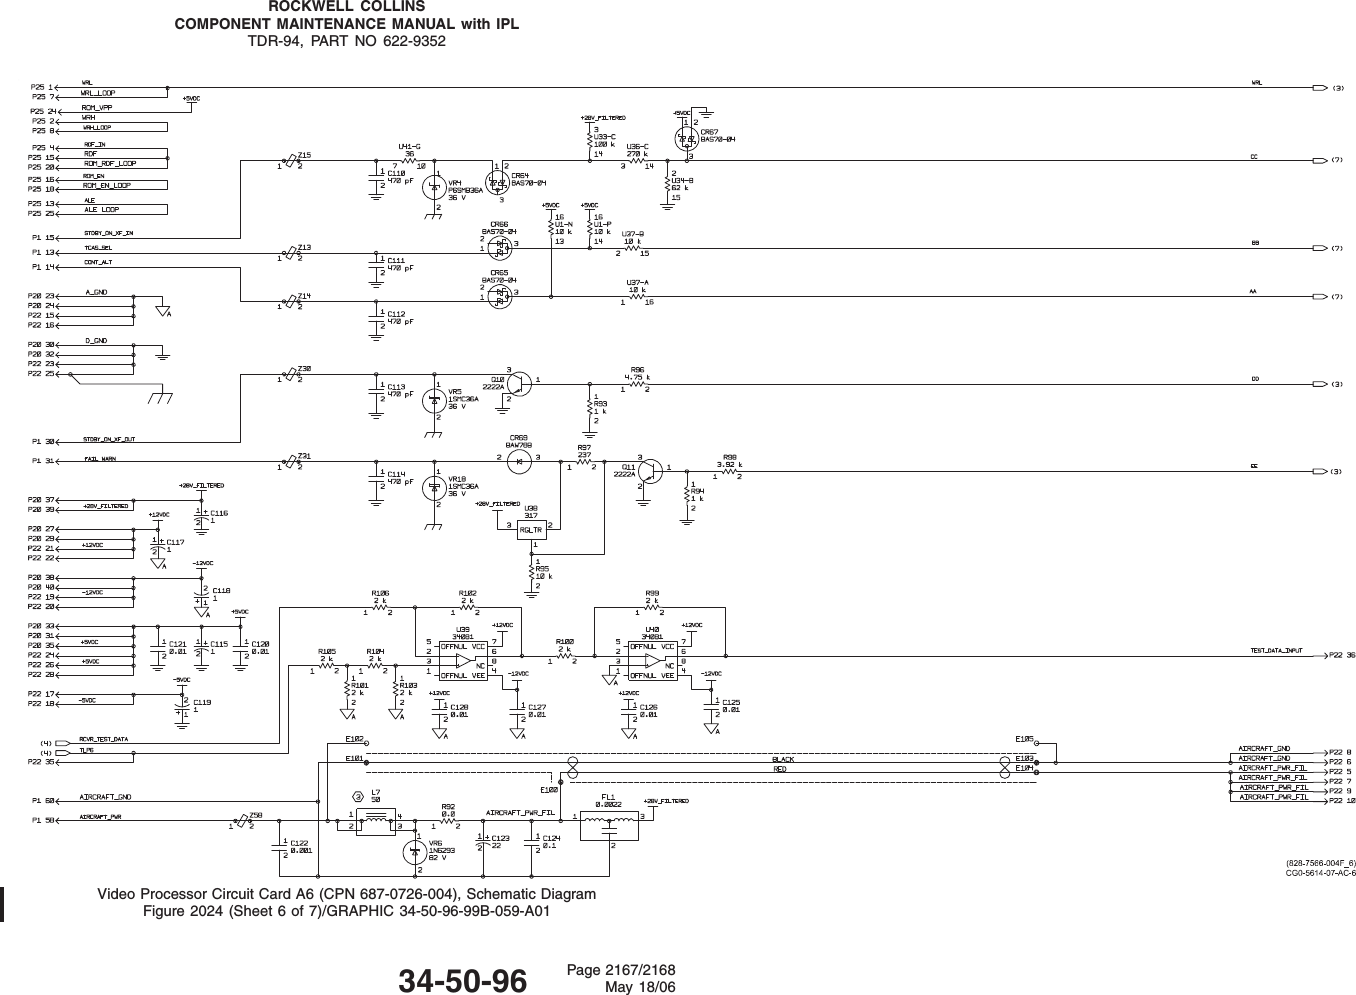 ROCKWELL COLLINSCOMPONENT MAINTENANCE MANUAL with IPLTDR-94, PART NO 622-9352Video Processor Circuit Card A6 (CPN 687-0726-004), Schematic DiagramFigure 2024 (Sheet 6 of 7)/GRAPHIC 34-50-96-99B-059-A0134-50-96 Page 2167/2168May 18/06